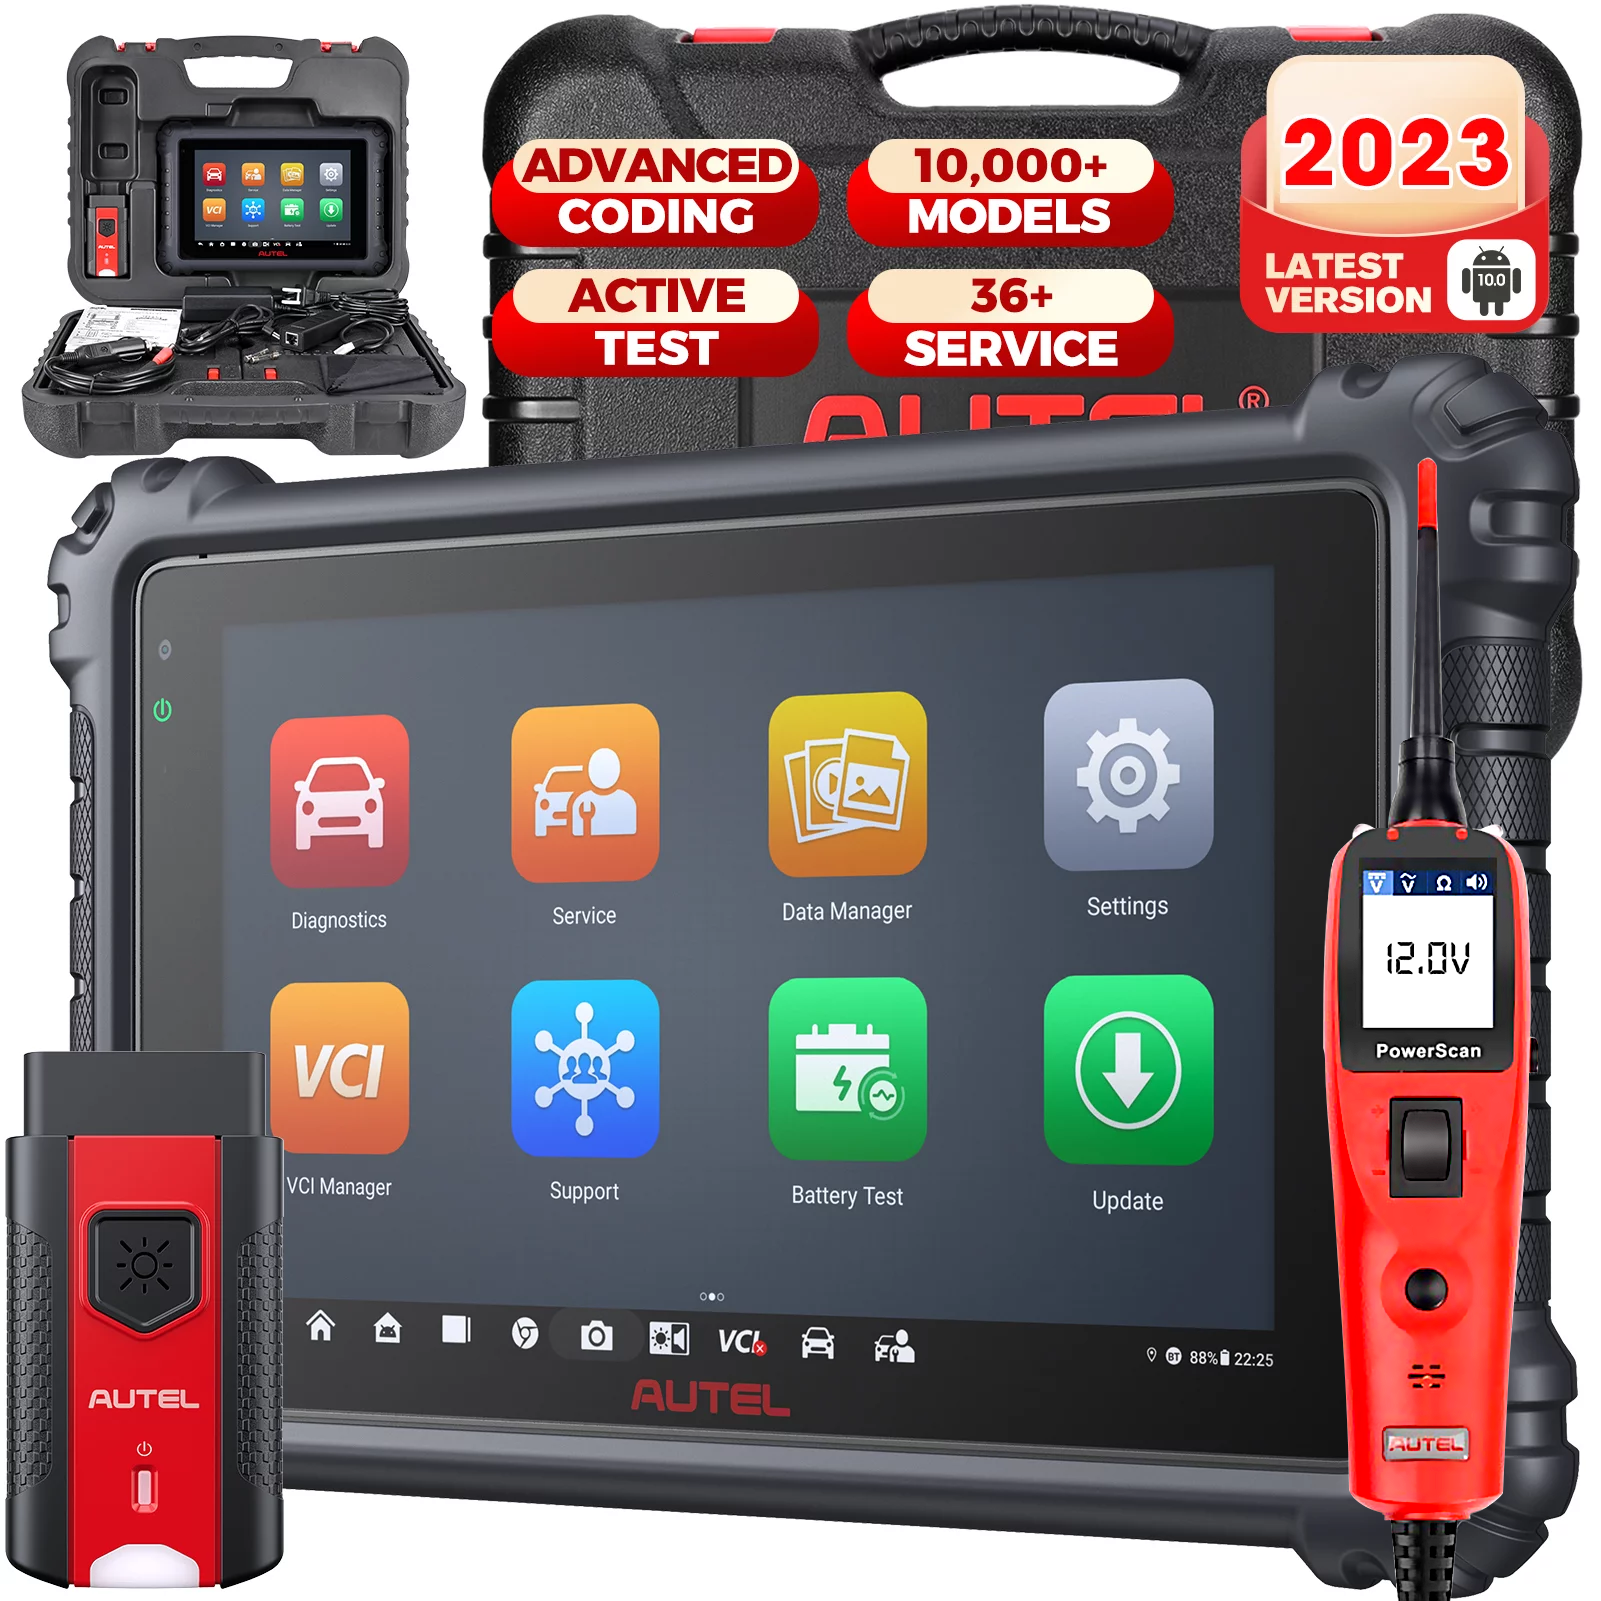 2023 Autel MaxiSys MS906 PRO OBD2 Car Diagnostic Tool Scanner ECU Coding,  Active Test, All System Diag, 33+ Service Functions